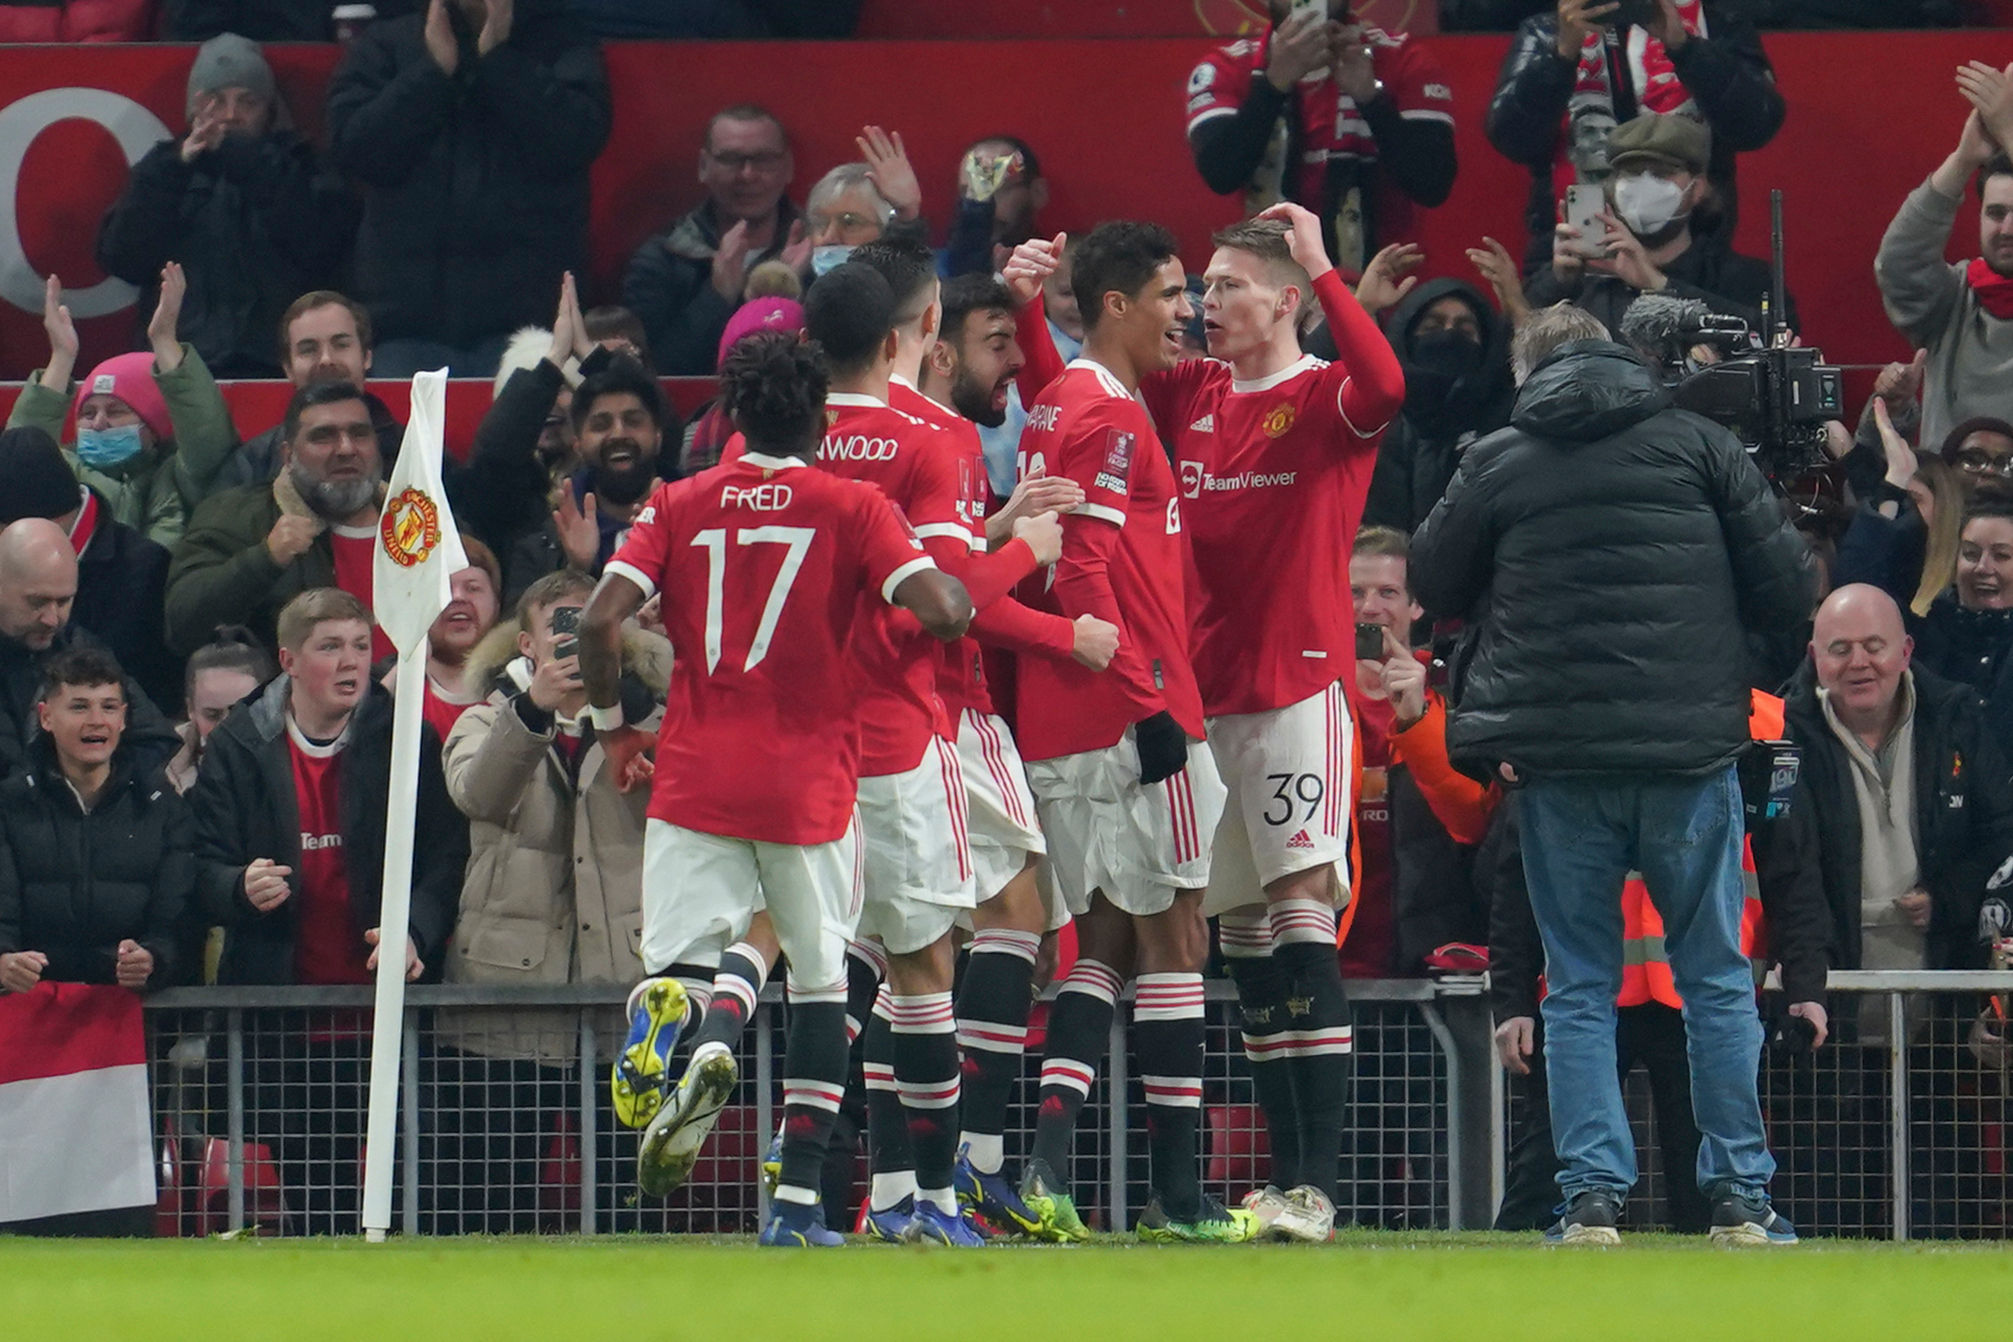 FA Cup: Without Ronaldo, Manchester United labour to 1-0 win over Aston Villa